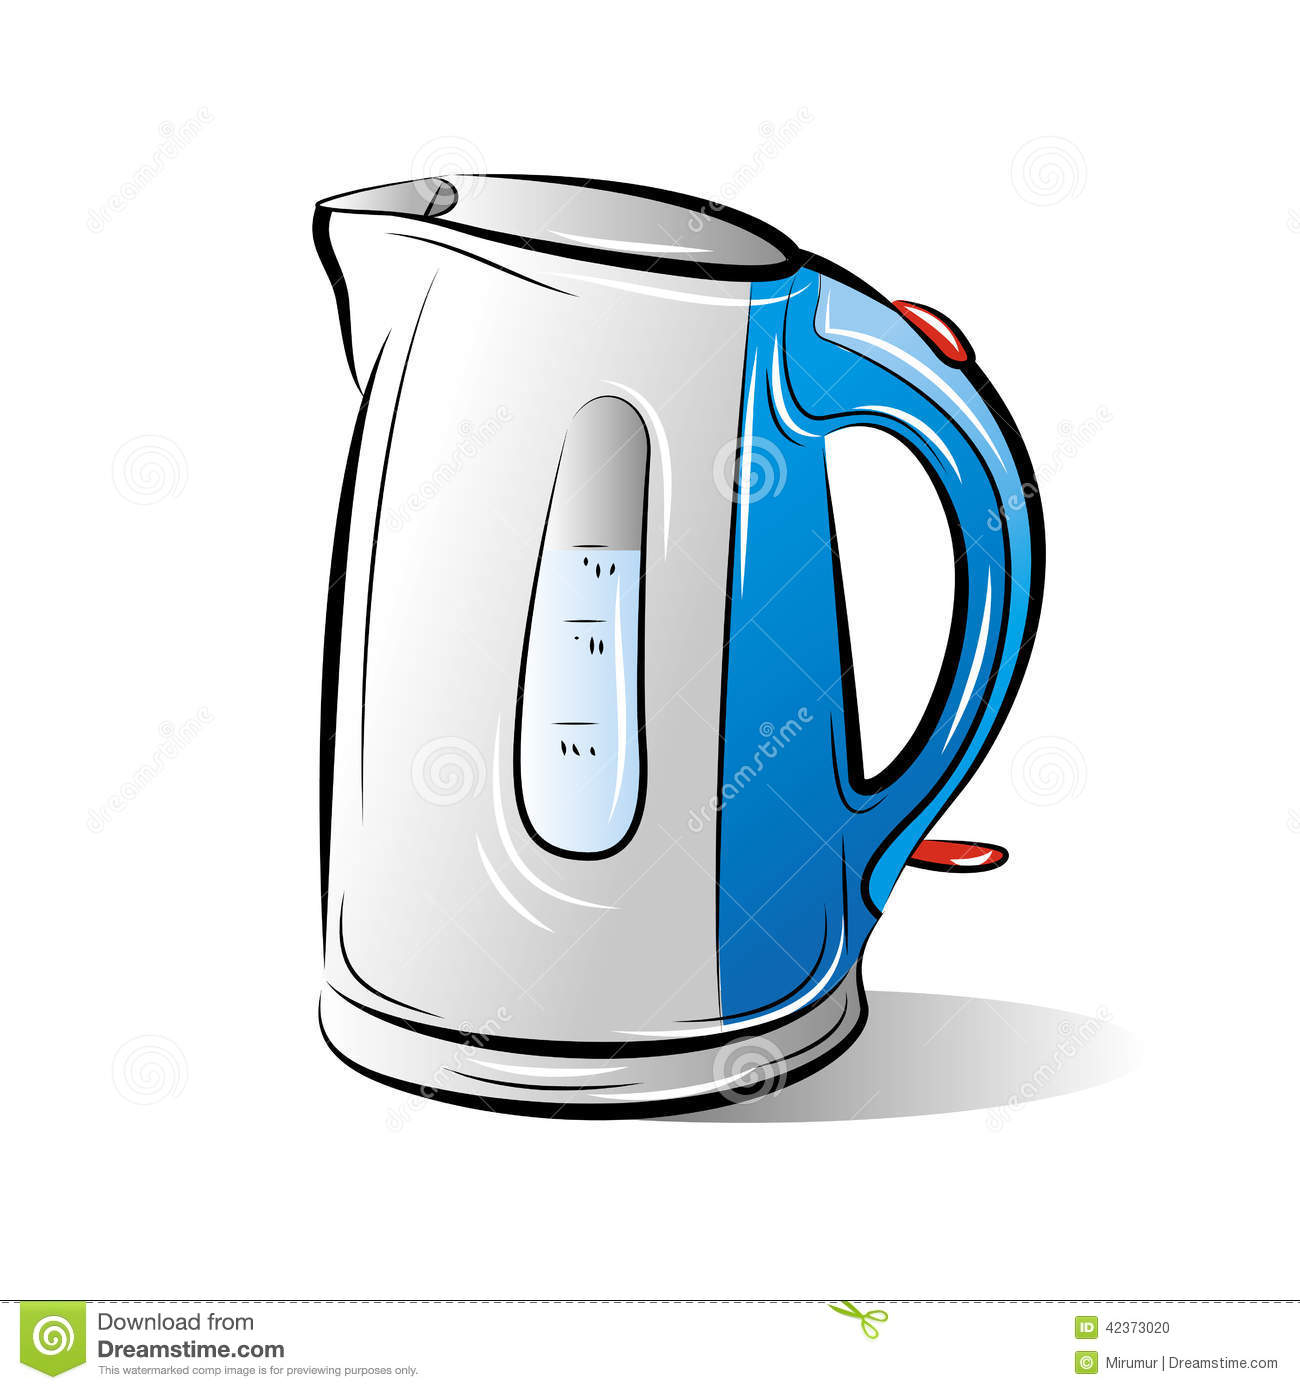 Drawing Of The Blue Teapot Kettle Stock Vector   Image  42373020